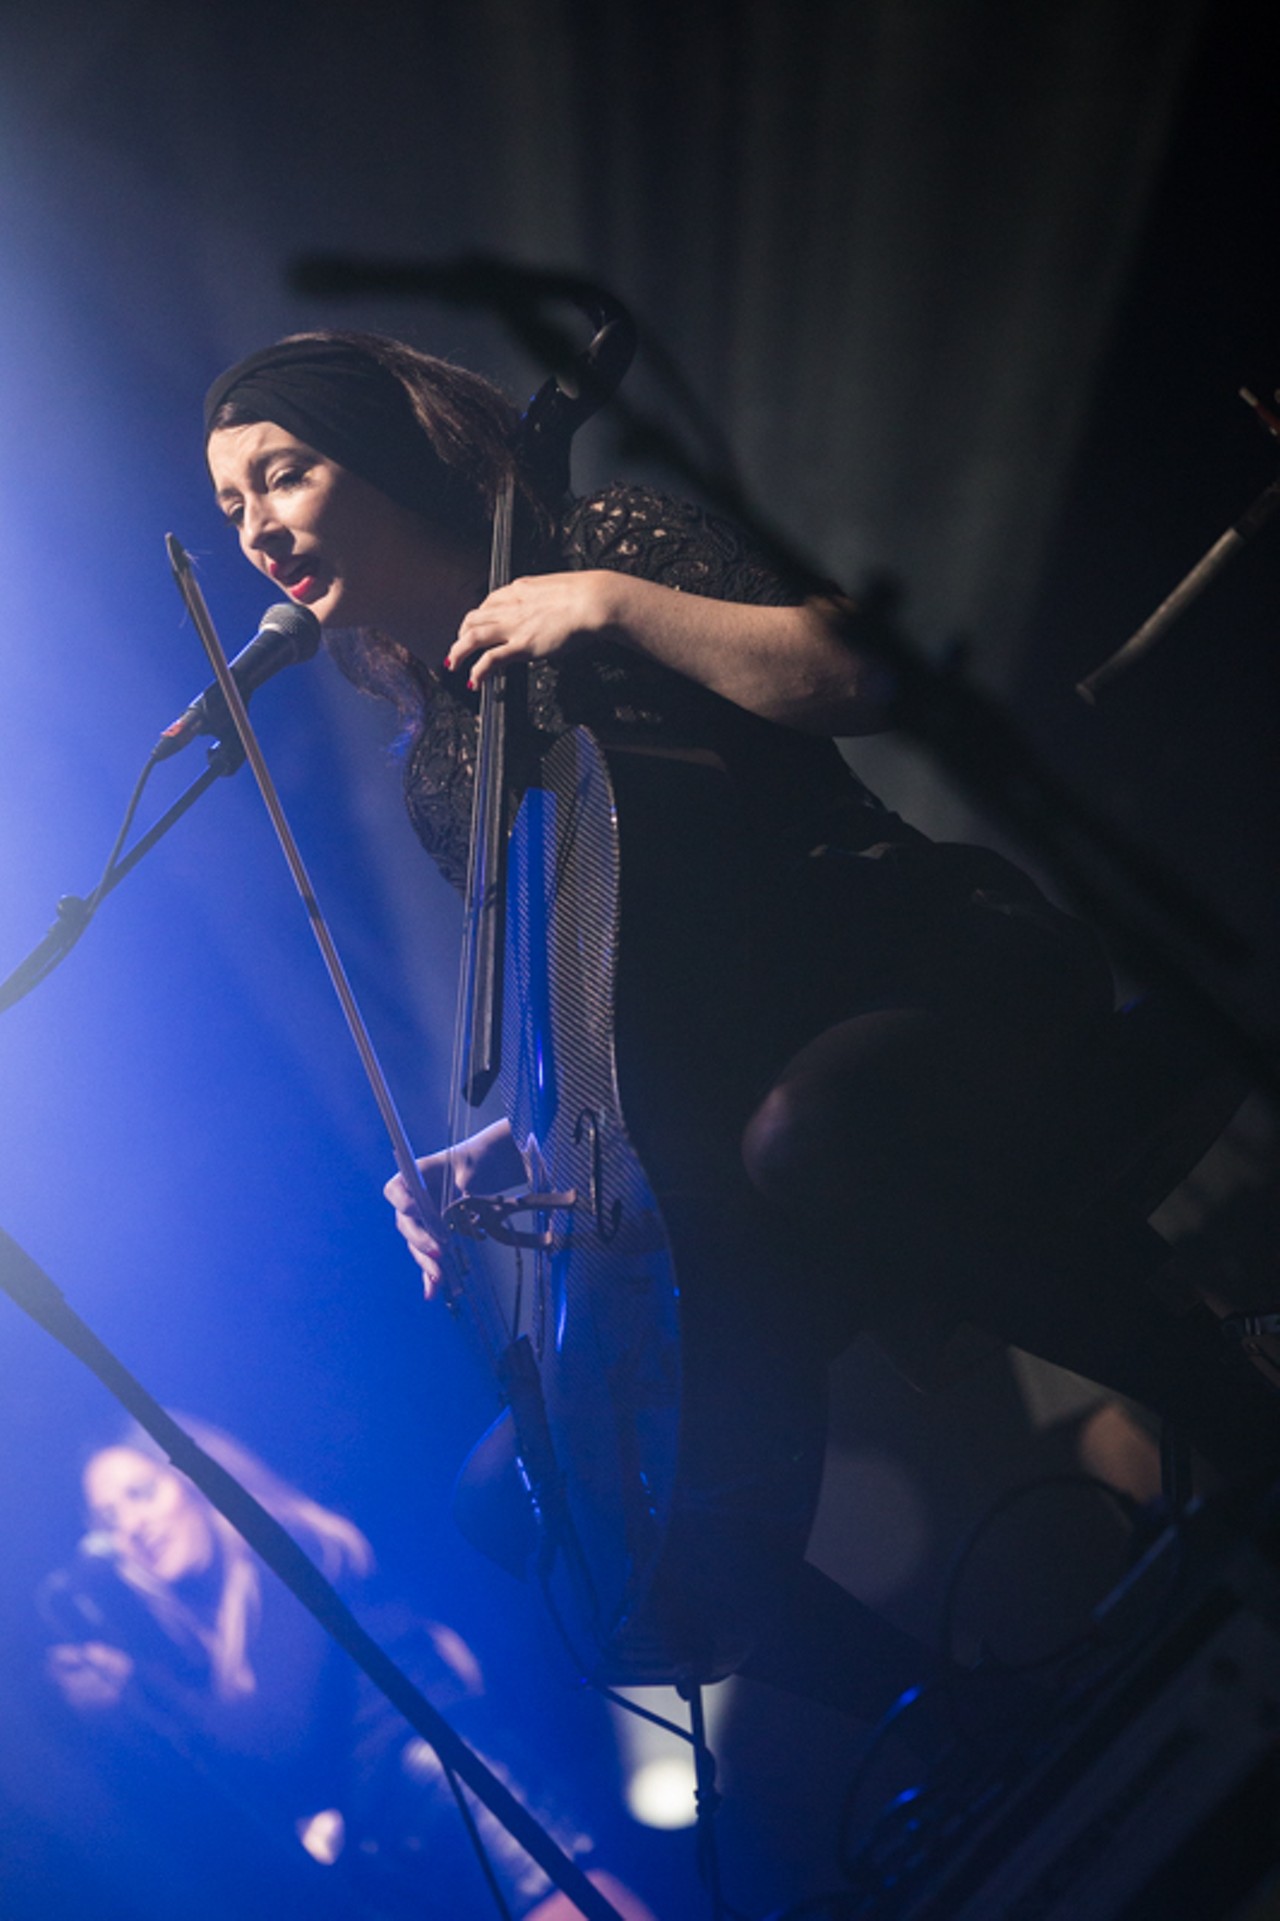 Alana Henderson of Hozier making elegant noise on her cello as Saturday night of the festival comes to a close.